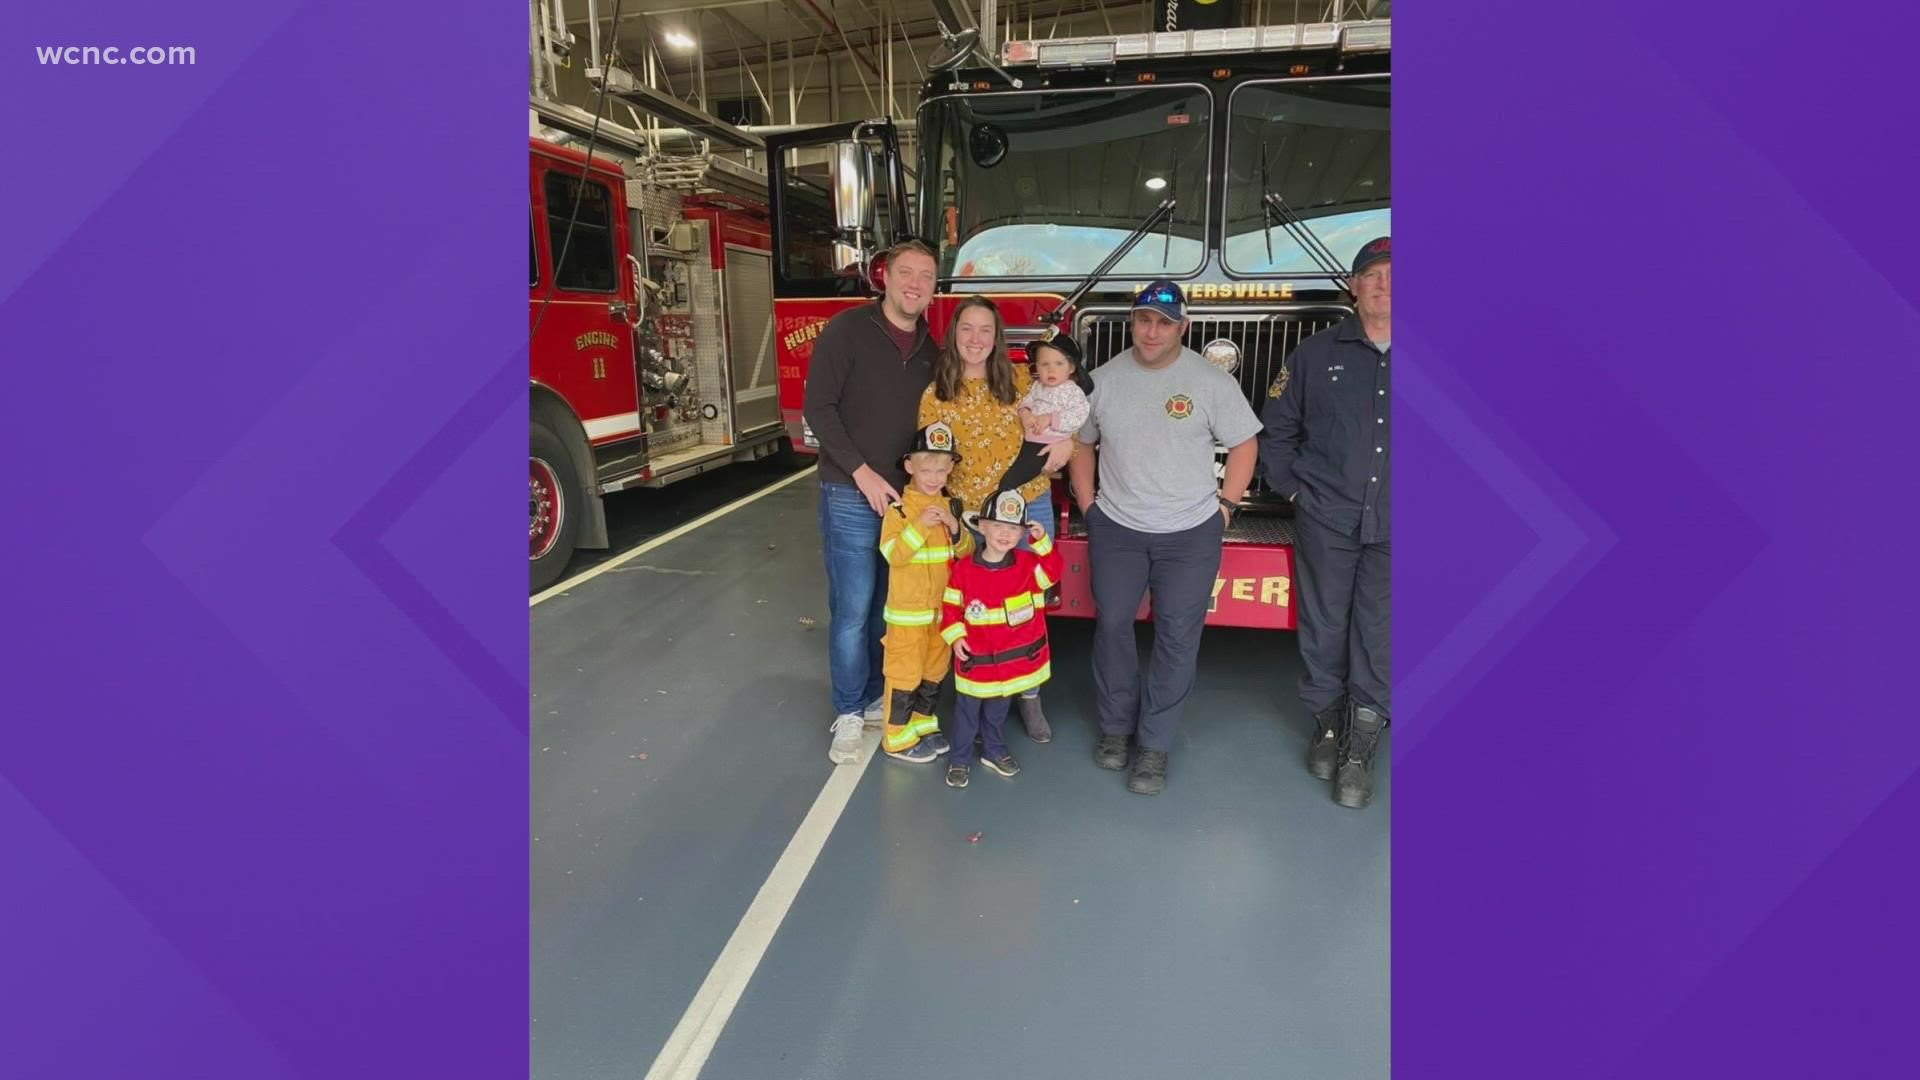 A 5-year-old broke open his piggy bank to help out his local fire department.